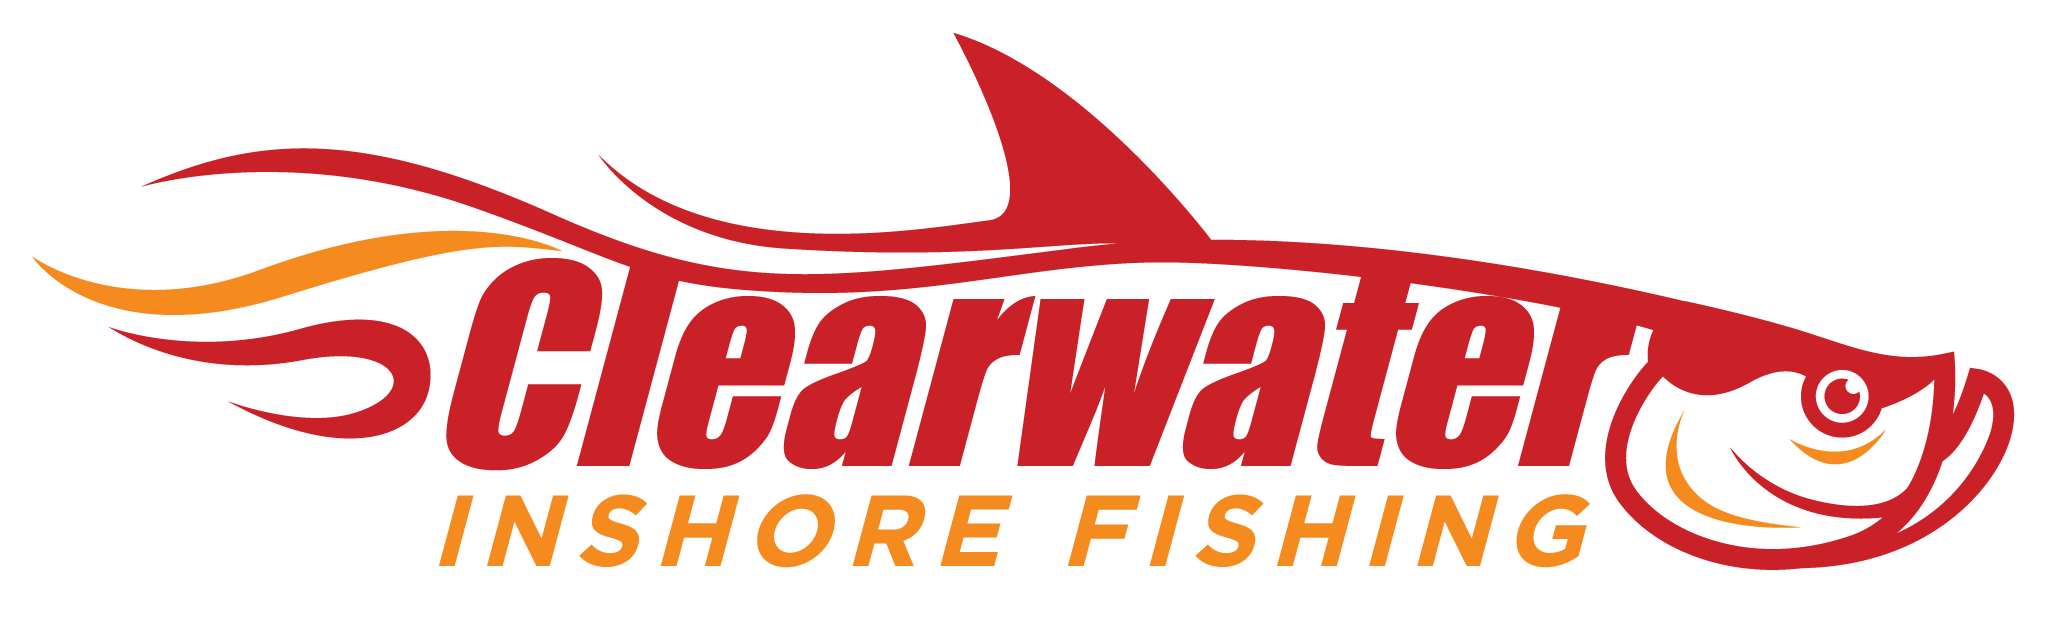 Clearwater Inshore Fishing Report for July